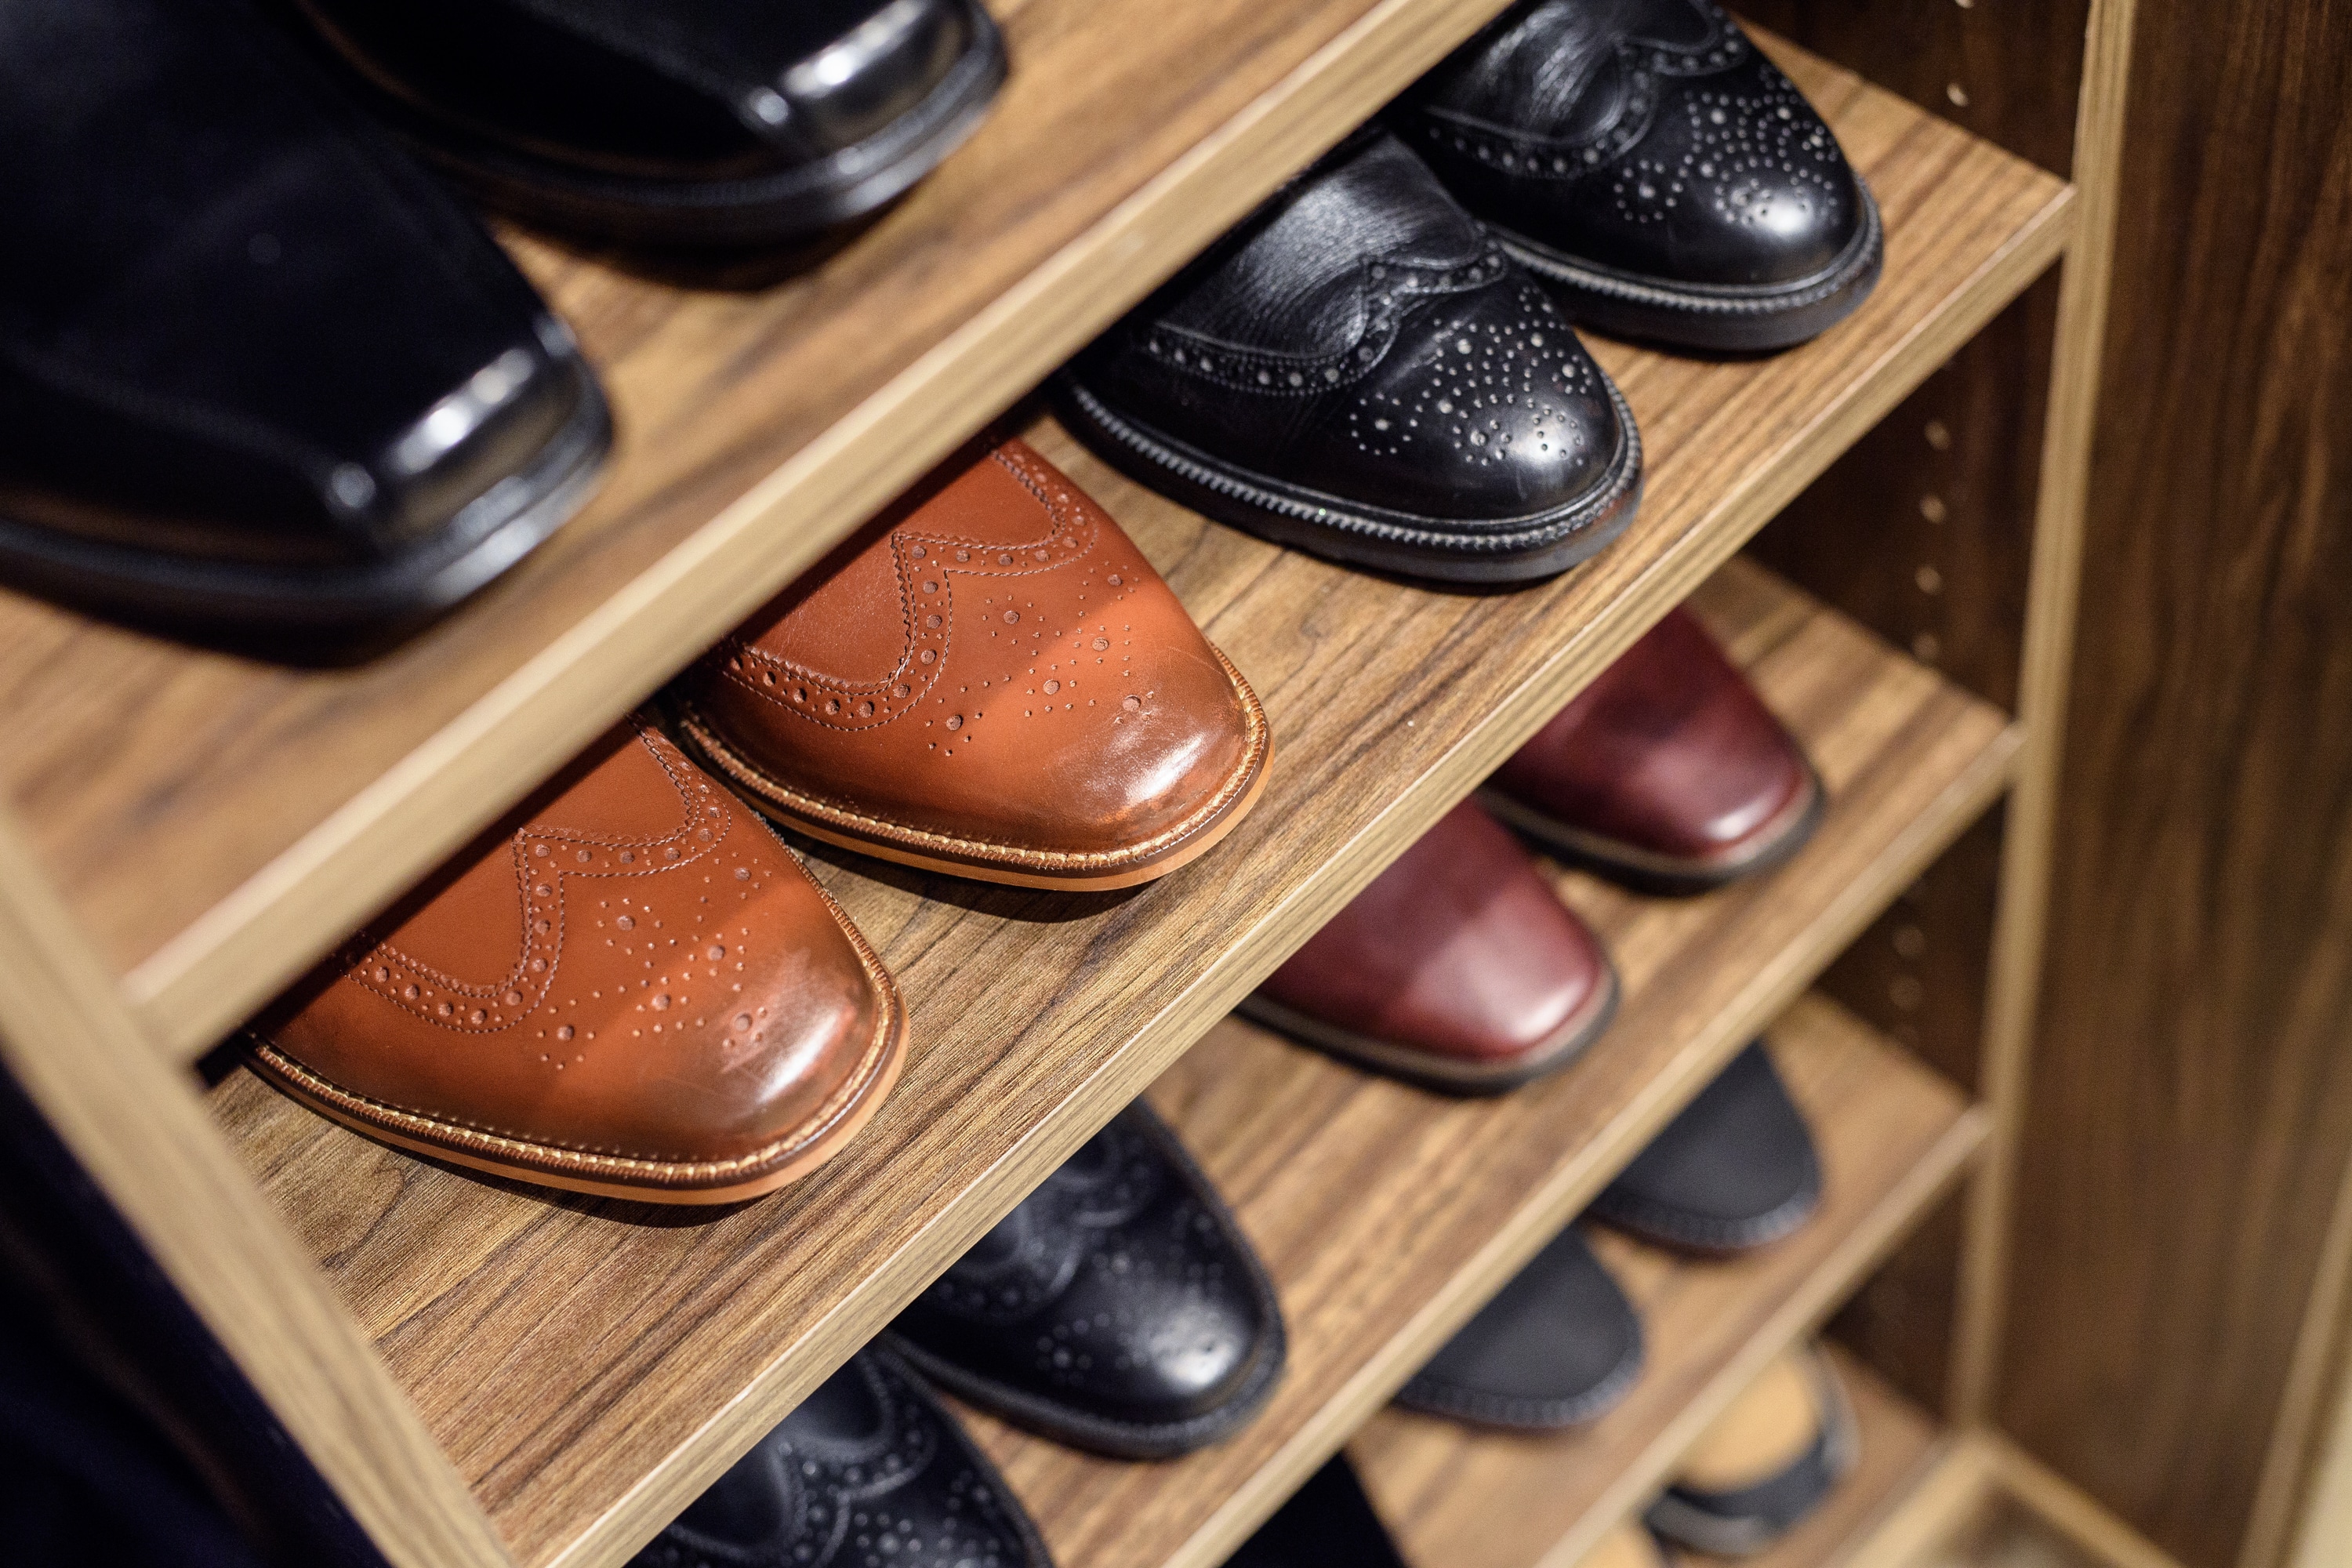 Close up of men's shoes on shelves